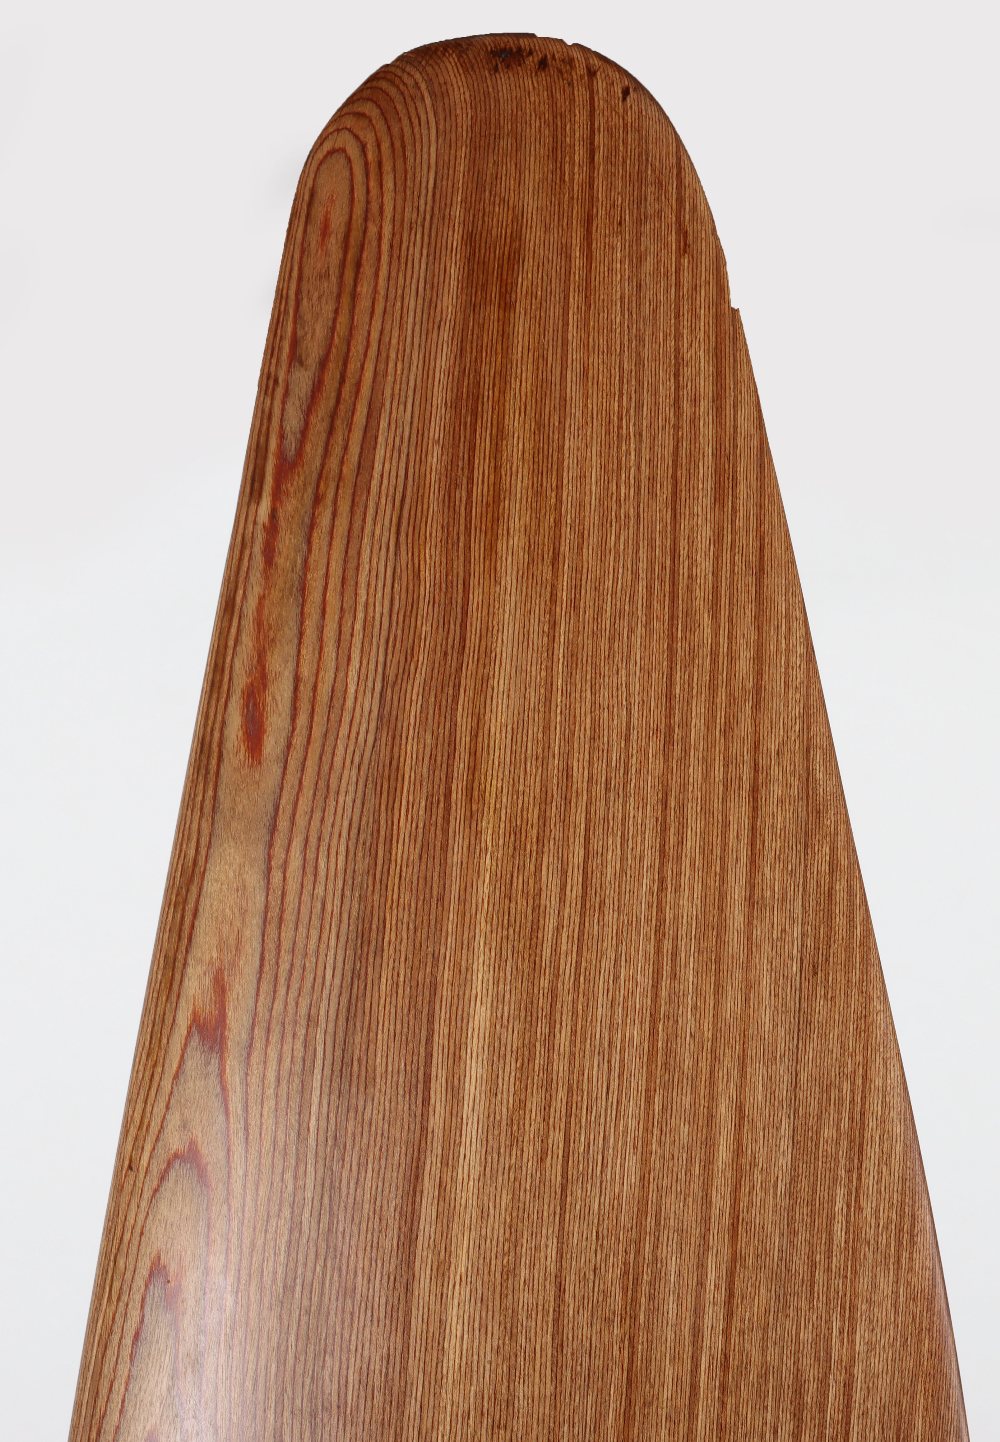 Wooden Aircraft Propeller Blade - Image 3 of 9